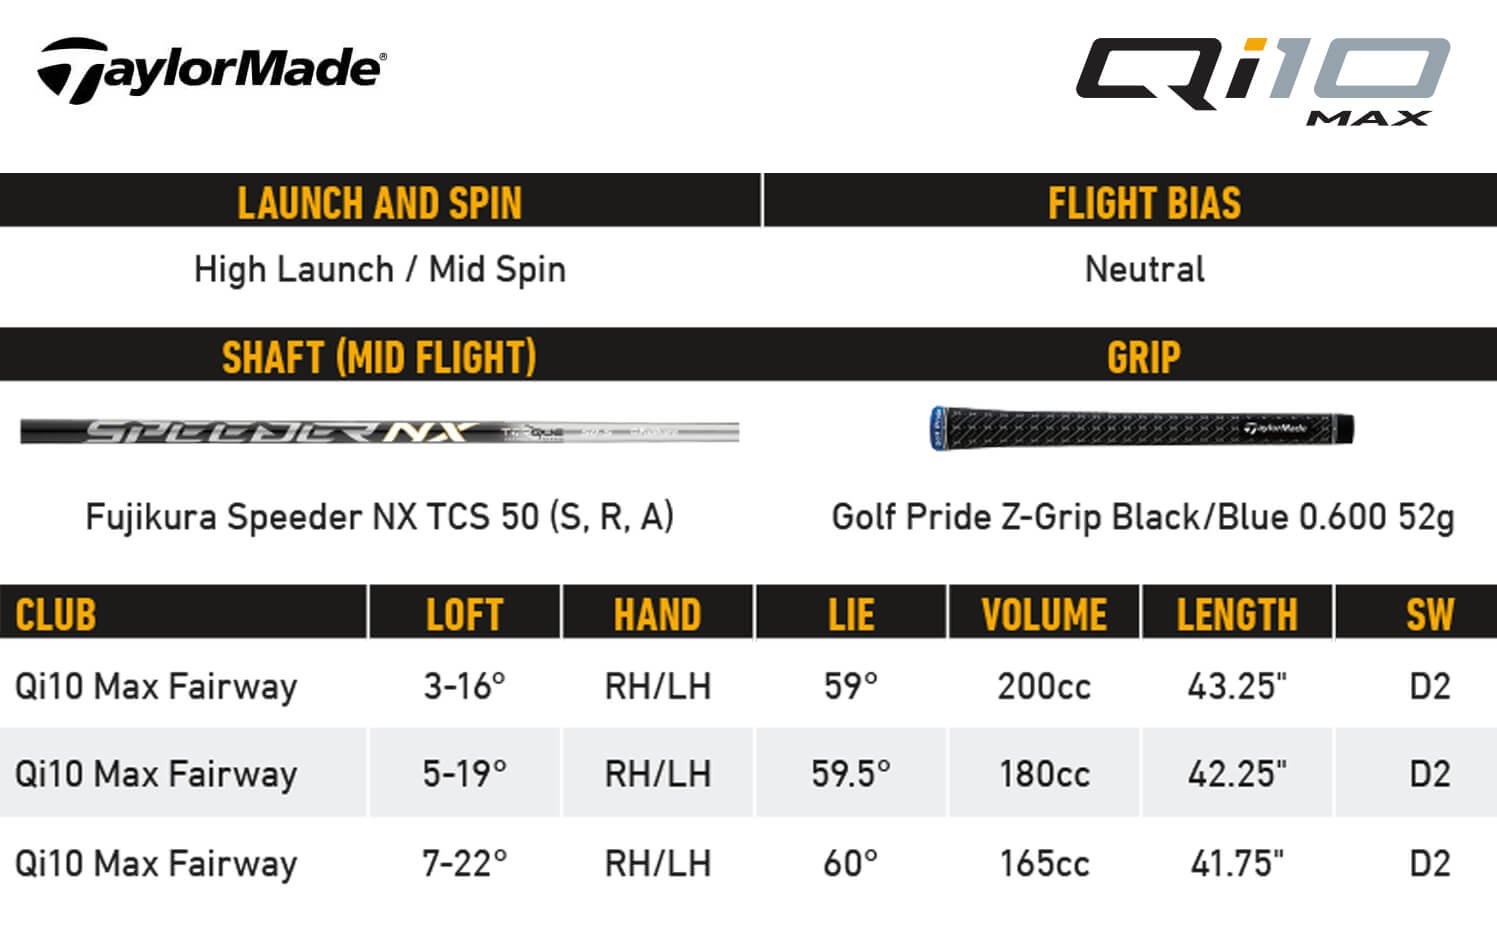 TaylorMade Qi10 Max Fairway Specifications